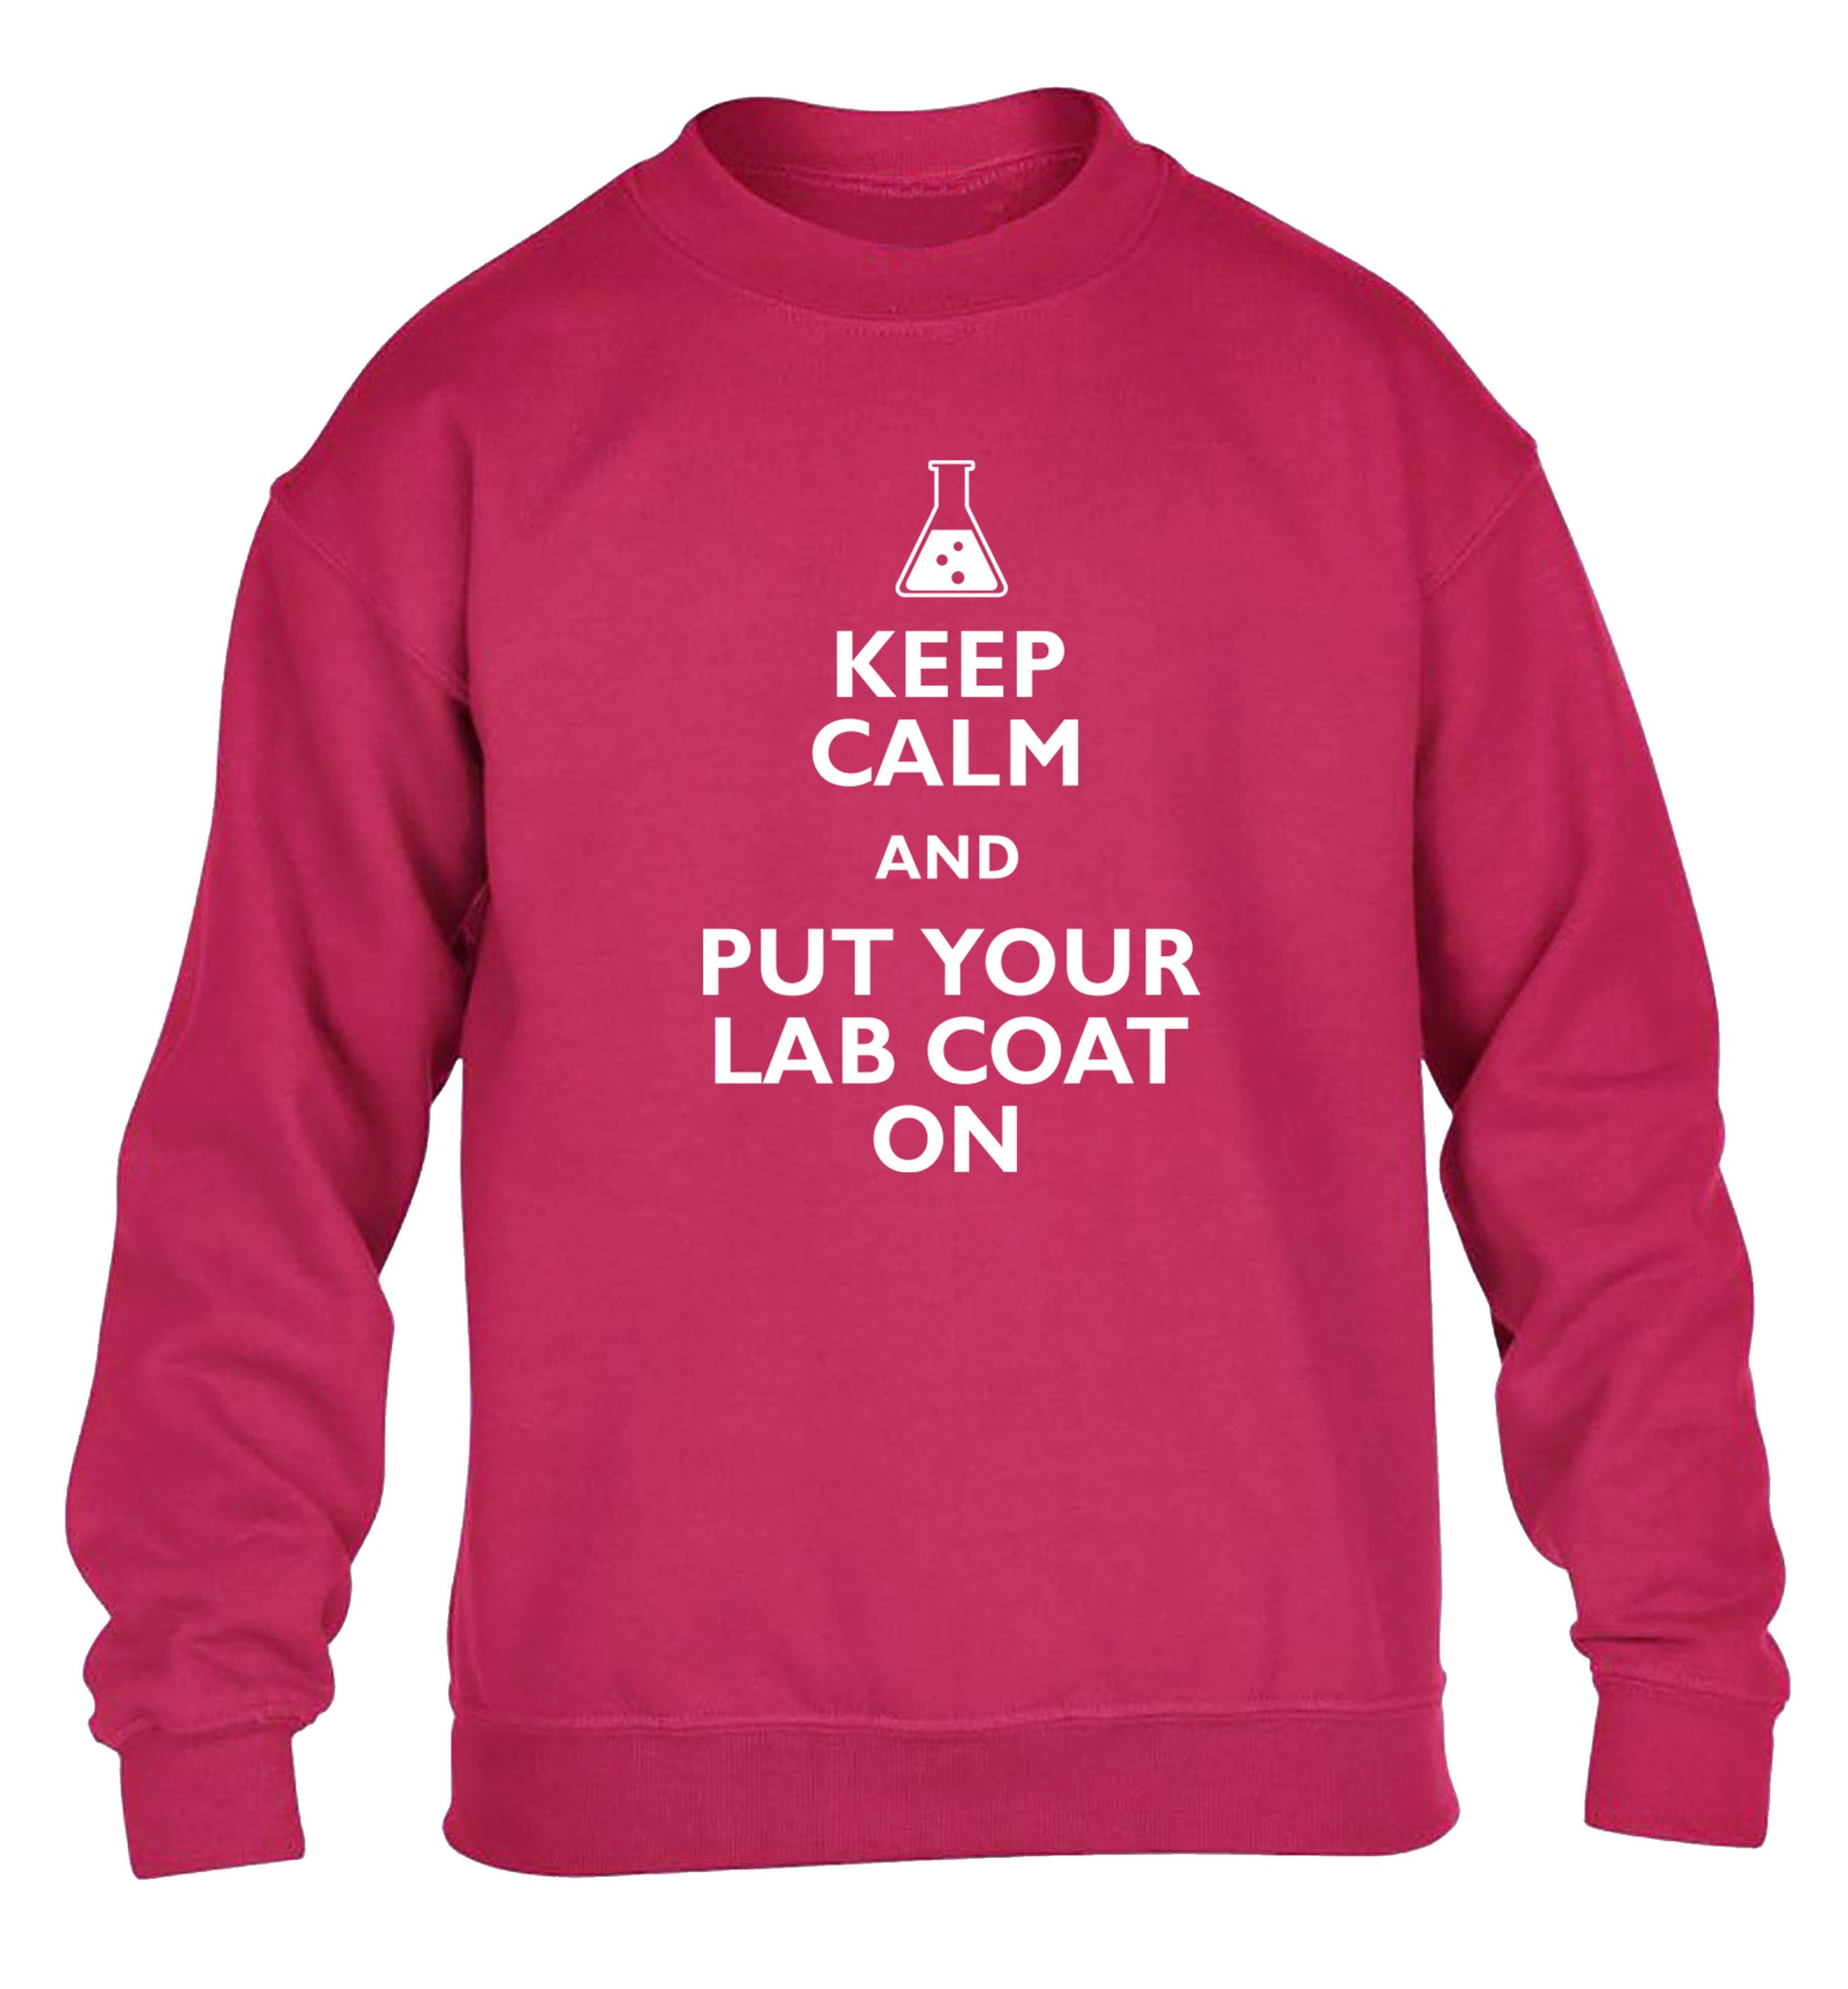 Keep calm and put your lab coat on children's pink sweater 12-14 Years